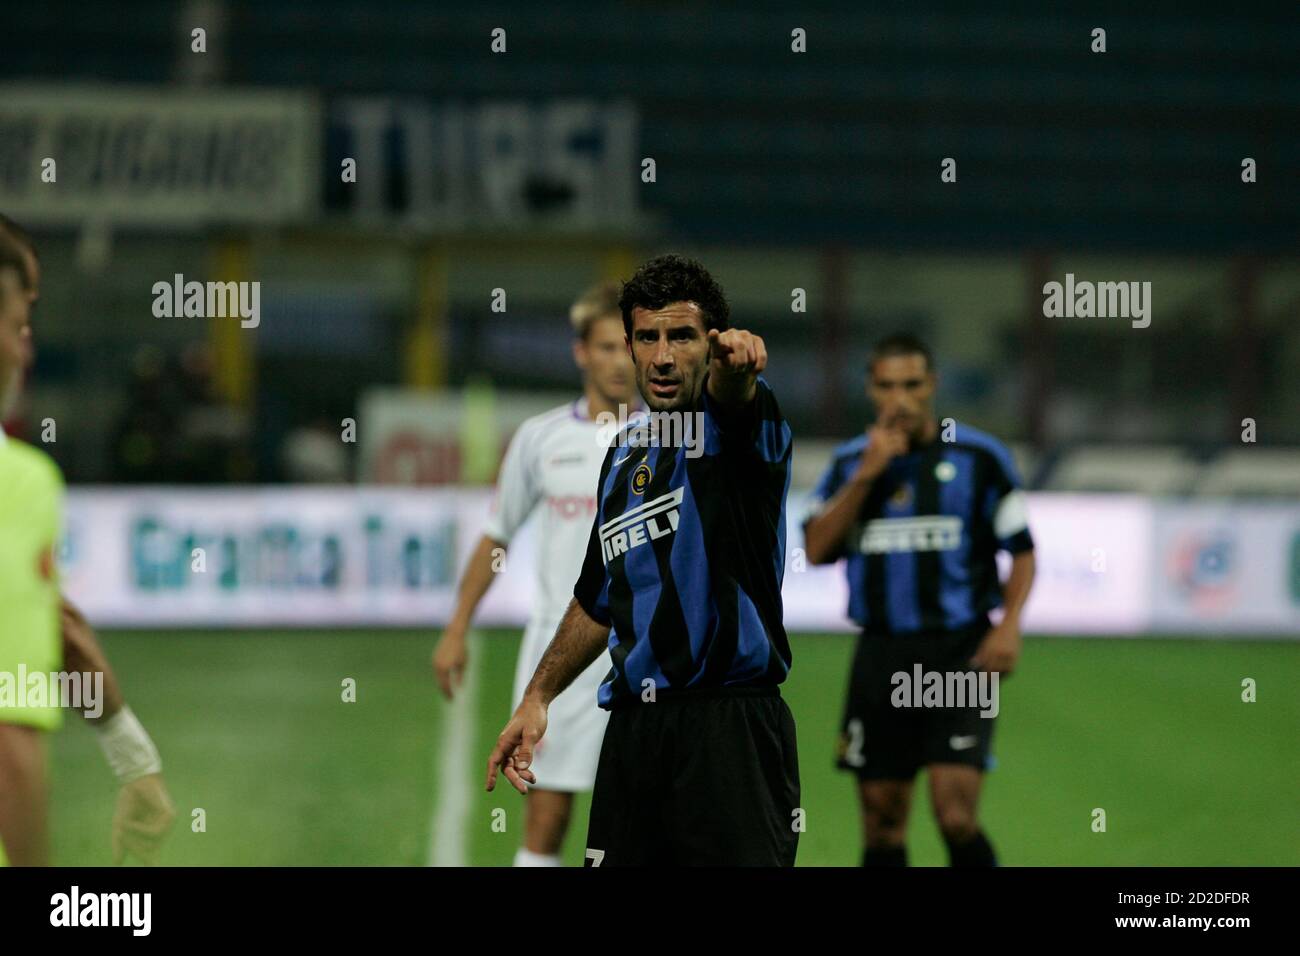 Inter Milan's Luis Figo (front L) of Portugal gestures during their Serie A soccer match against Fiorentina at the San Siro stadium in Milan, northern Italy, September 25, 2005. REUTERS/Alessandro Bianchi   BEST QUALITY AVAILABLE Stock Photo